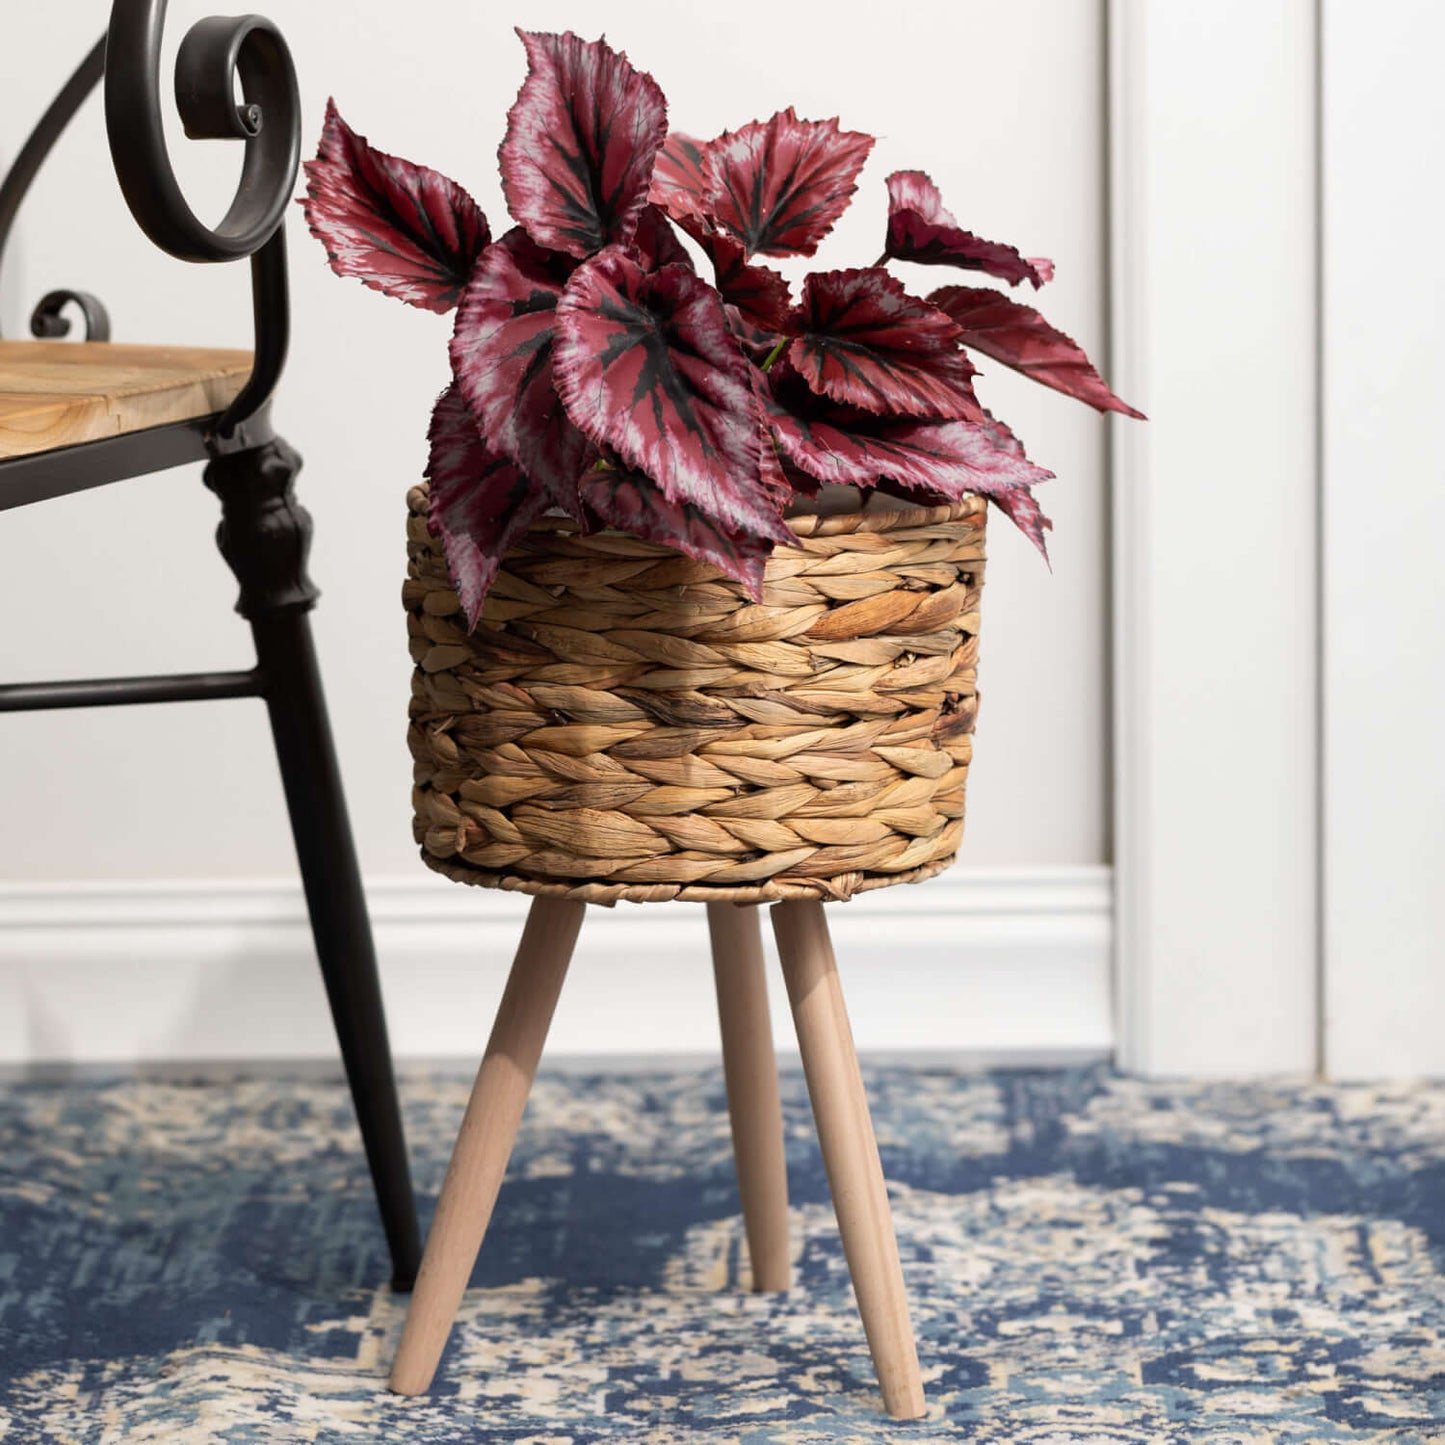 basket planter with plant in it on blue patterned carpet